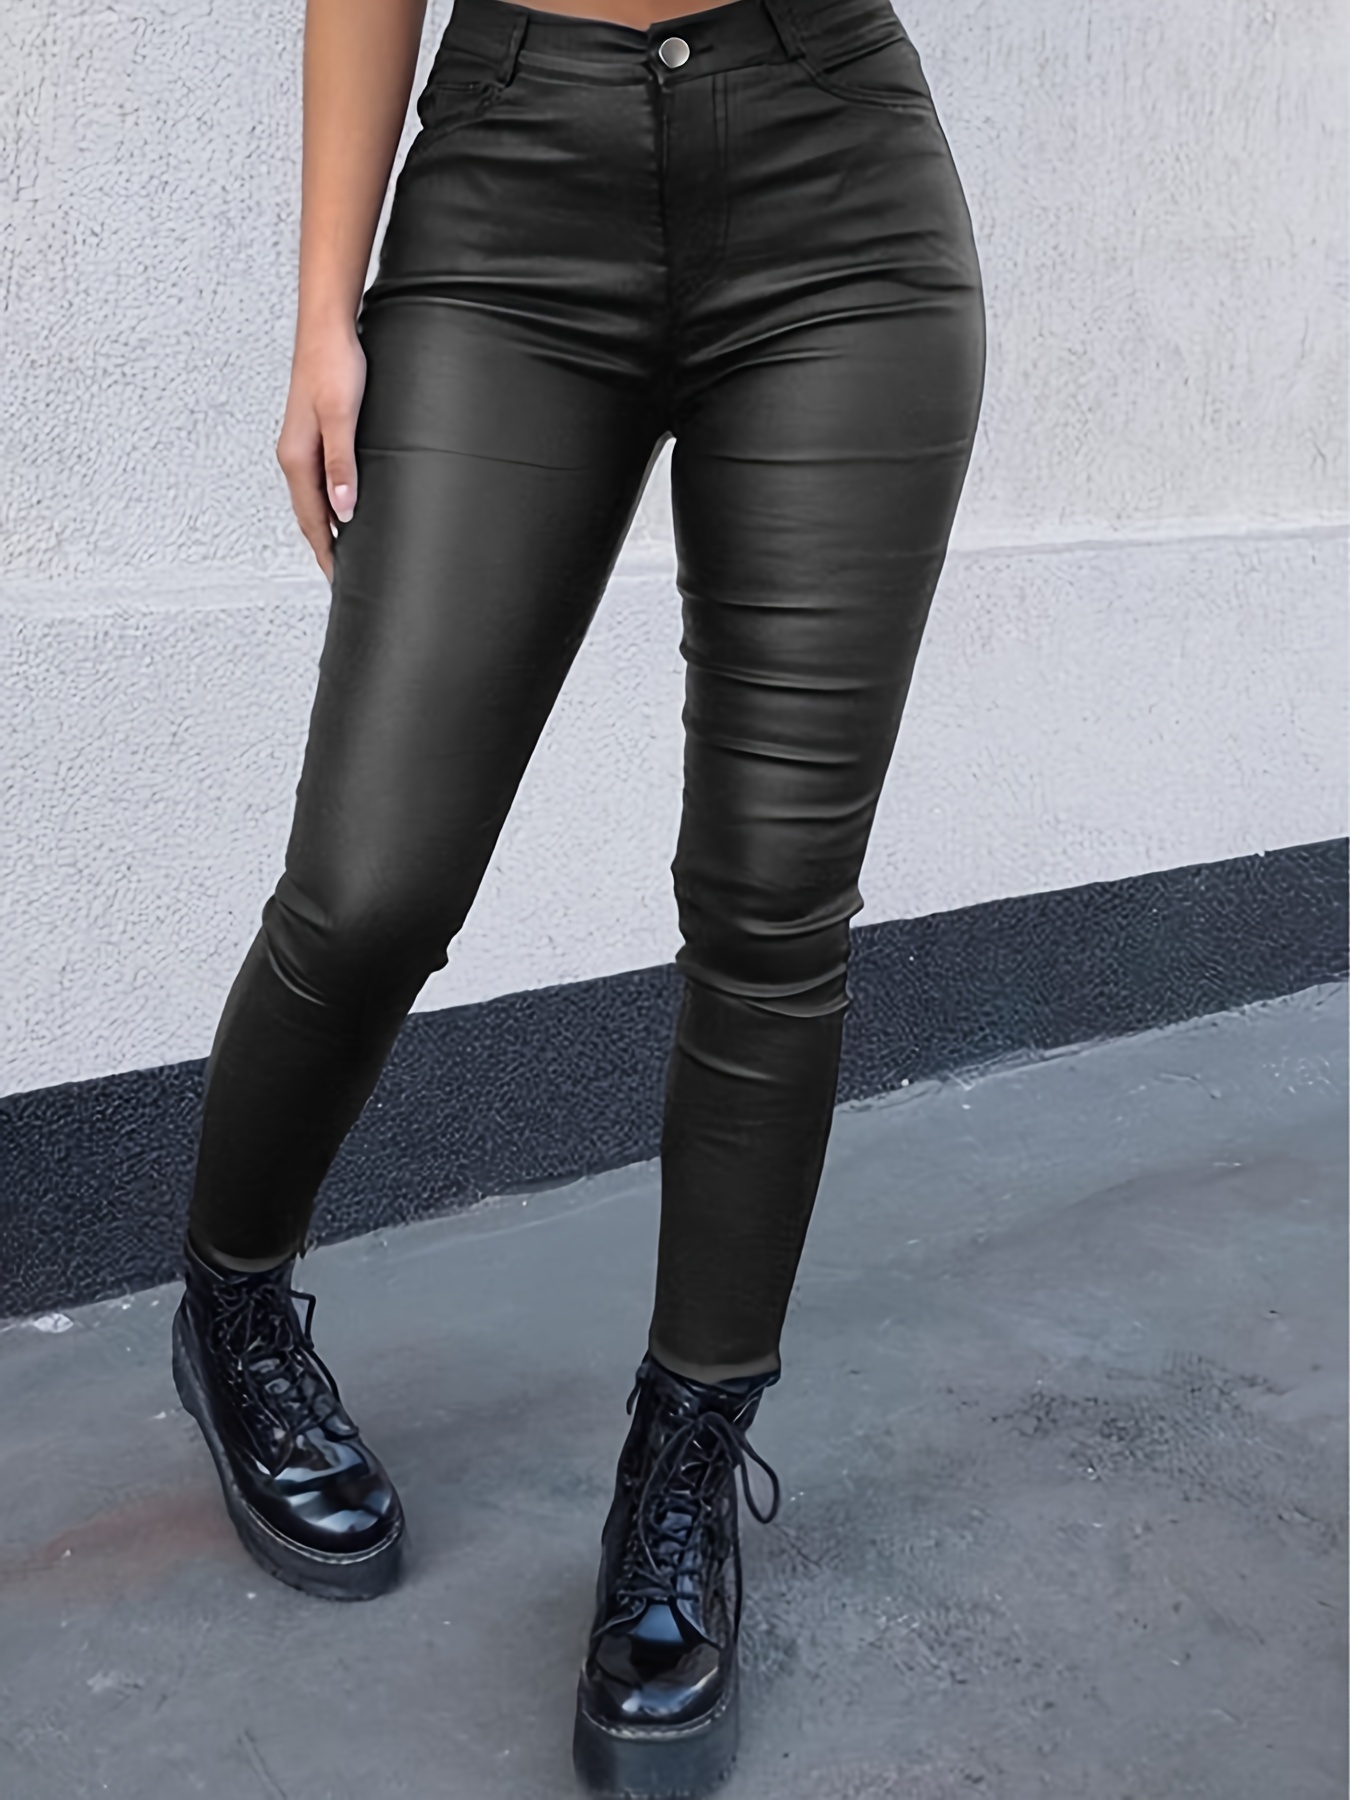 New Sexy Skinny Tight Black Leather Look Leggings Pants with Studs Size 12  14